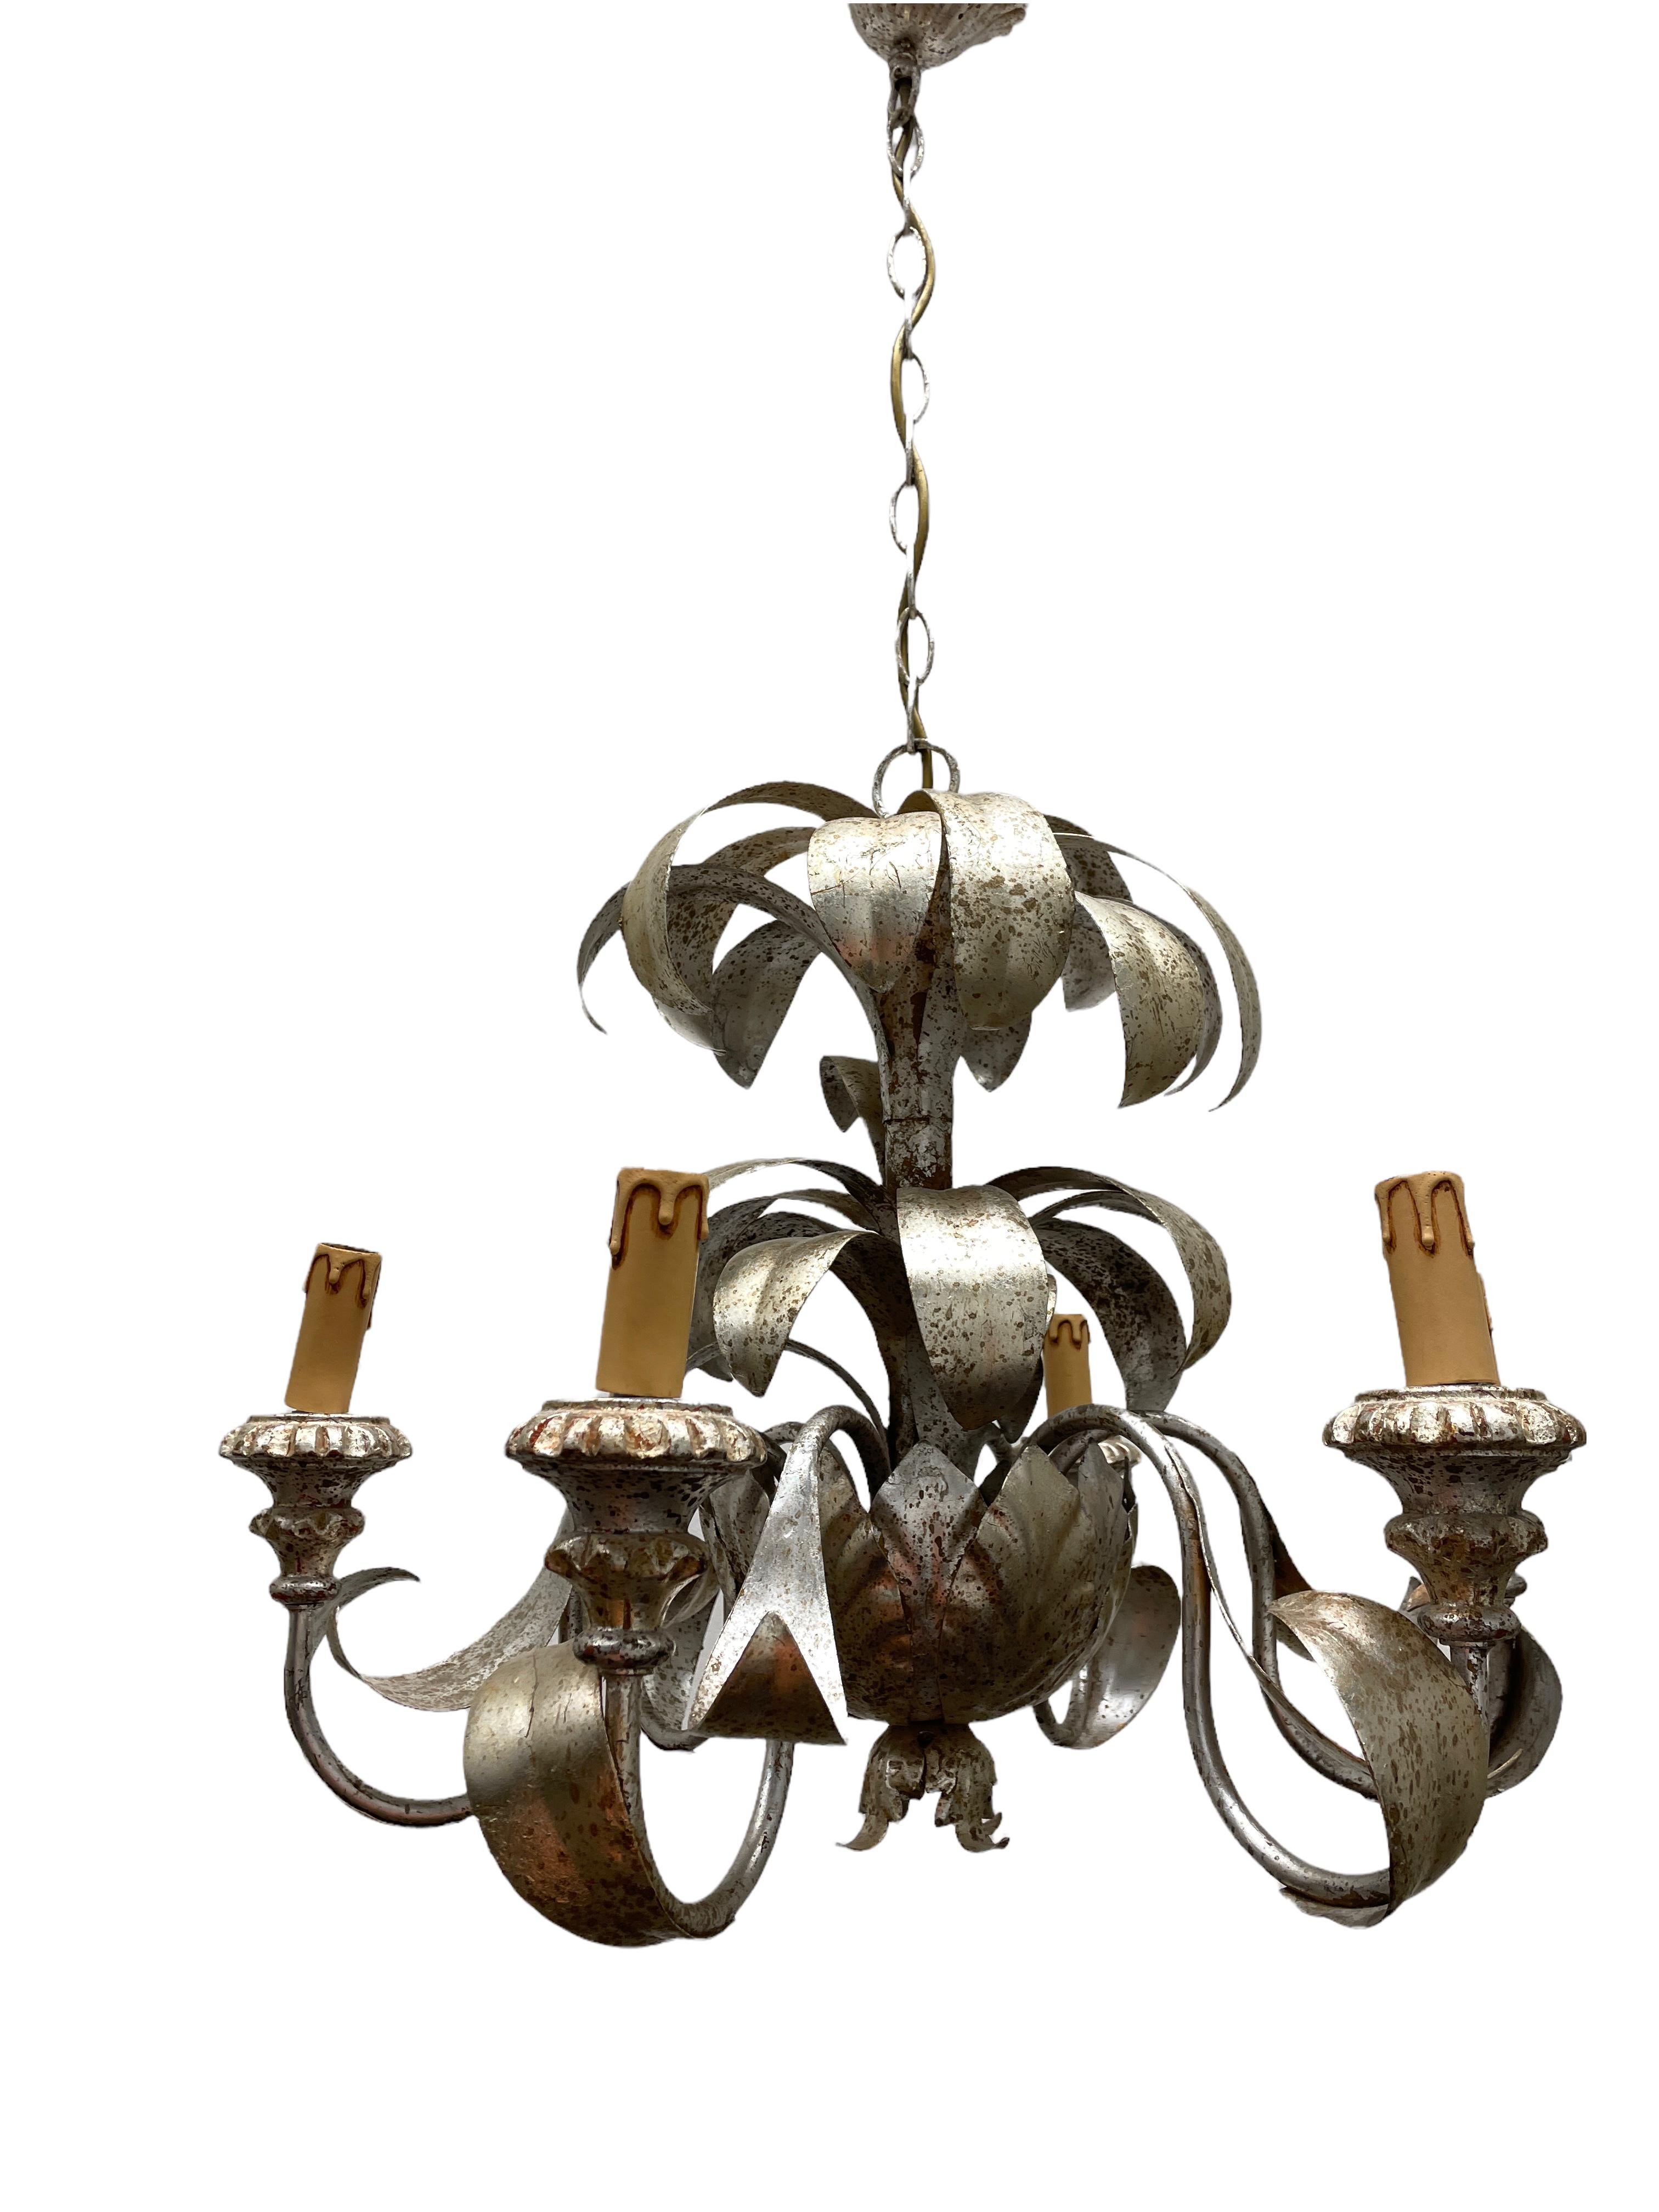 Add a touch of opulence to your home with this charming chandelier! Perfect silvered Metal to enhance any chic or eclectic home. We'd love to see it hanging in an entry hall or in a Living / Dinning room area. Built in the 1960s, attributed to